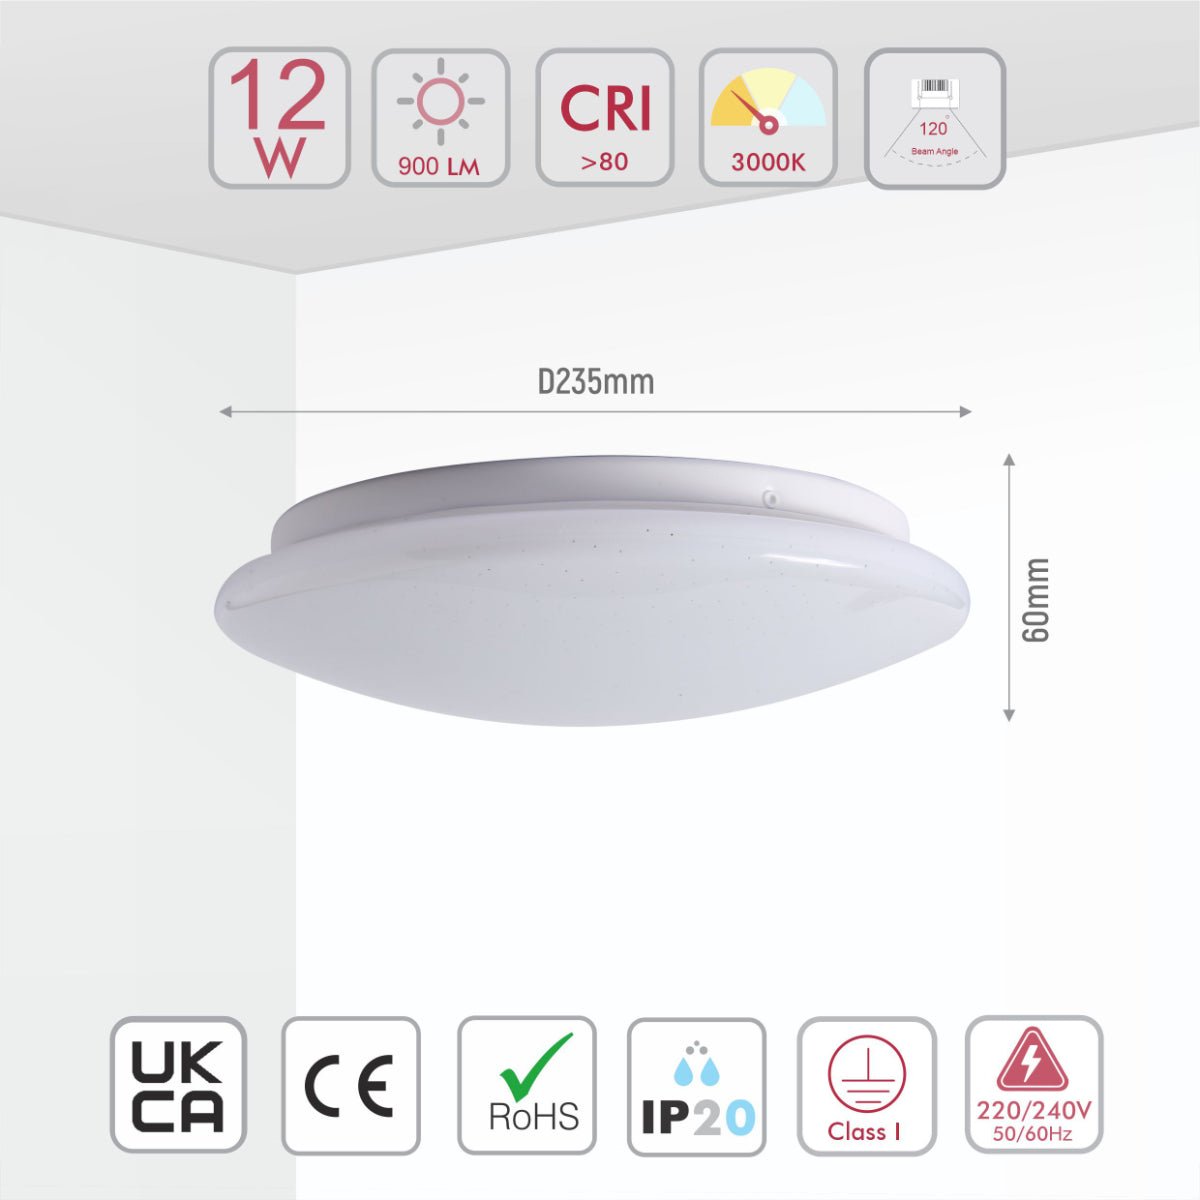 Size and specs of Moonlight Flush Ceiling Light 12W Warm White Cool White Cool Daylight 900LM IP20 non-yellowing PMMA Cover | TEKLED 121-03980